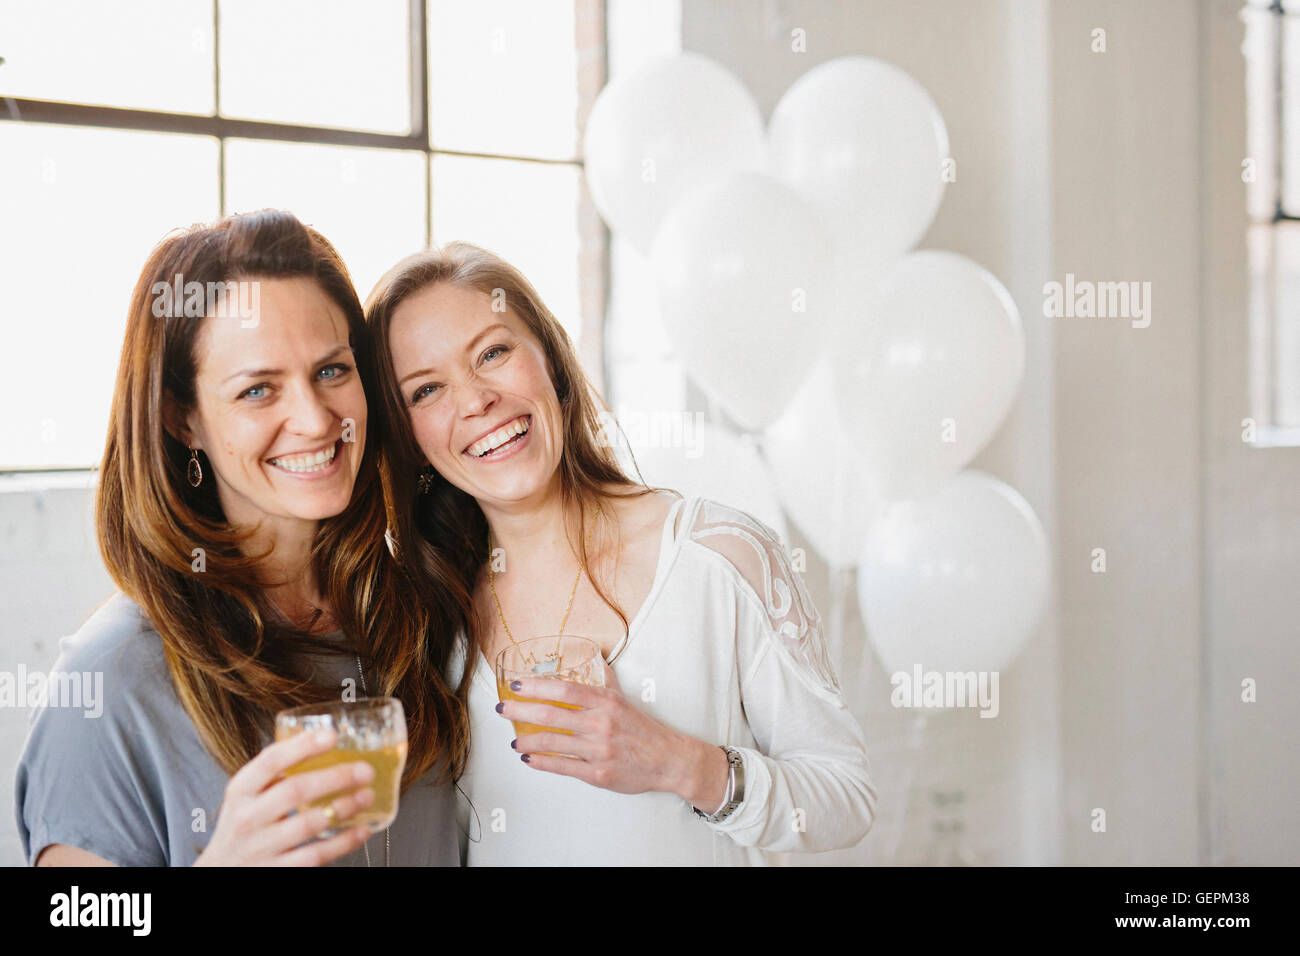 Two women standing side by side holding drinks. White balloons, party decorations. Stock Photo